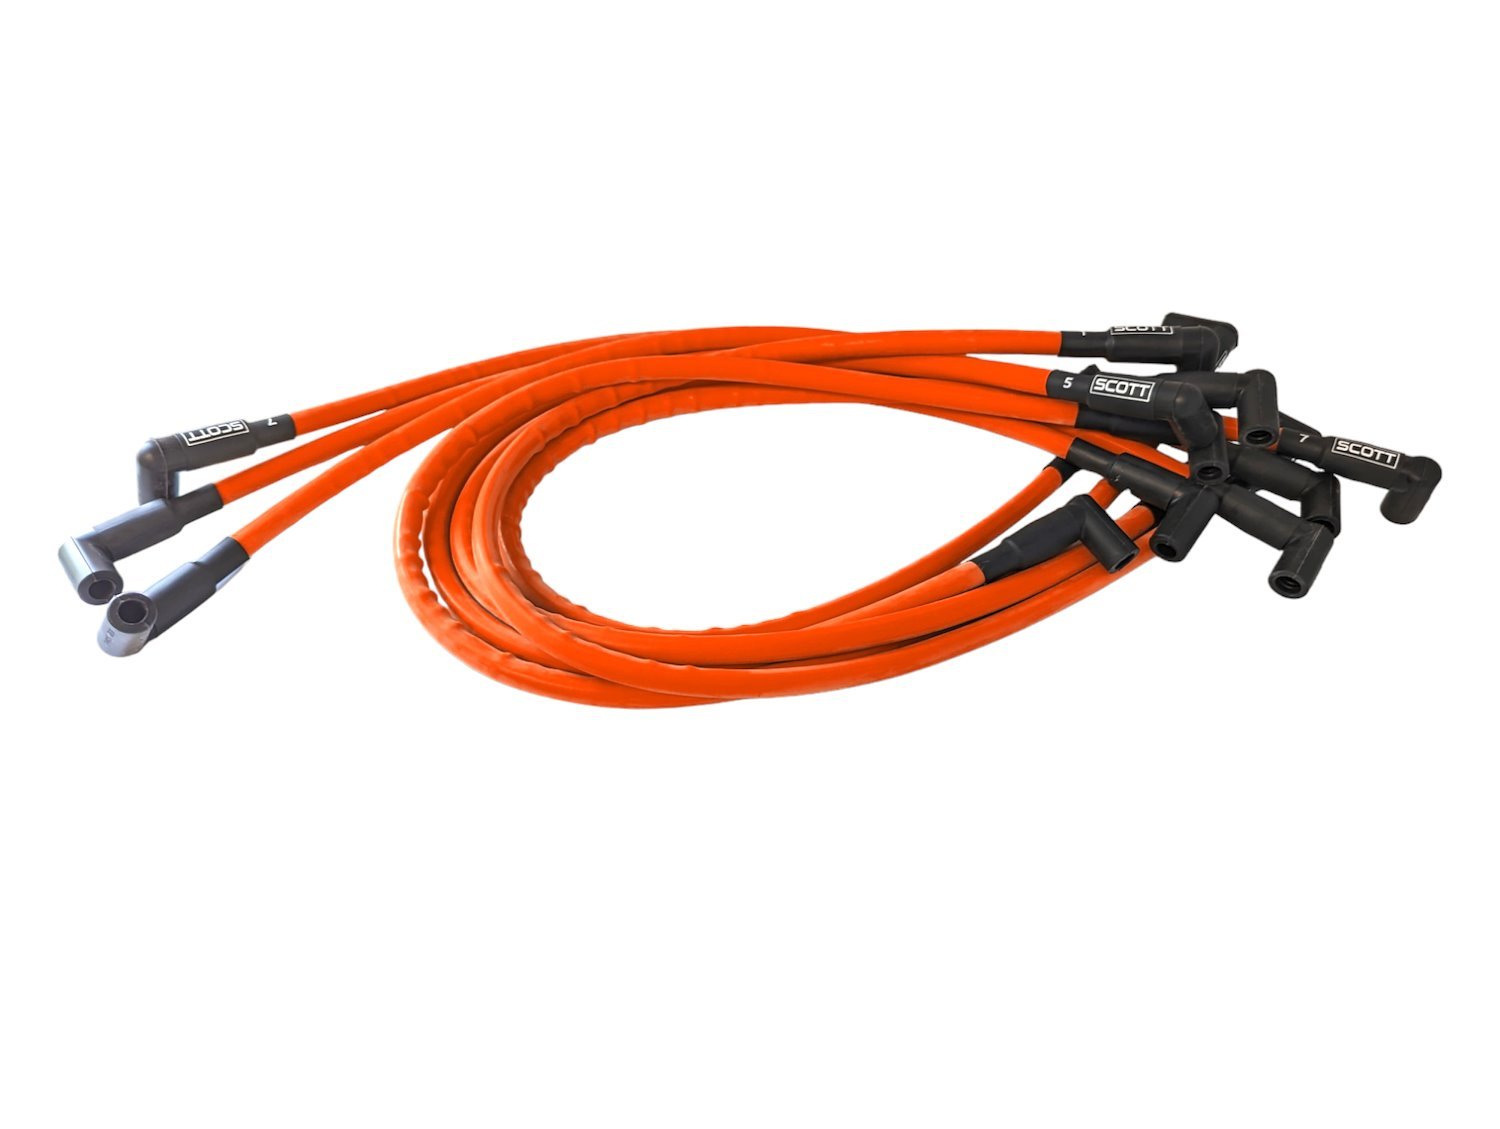 SPW300-CH-437-9 Super Mag Fiberglass-Oversleeved Spark Plug Wire Set for Small Block Chevy, Over & Under [Orange]